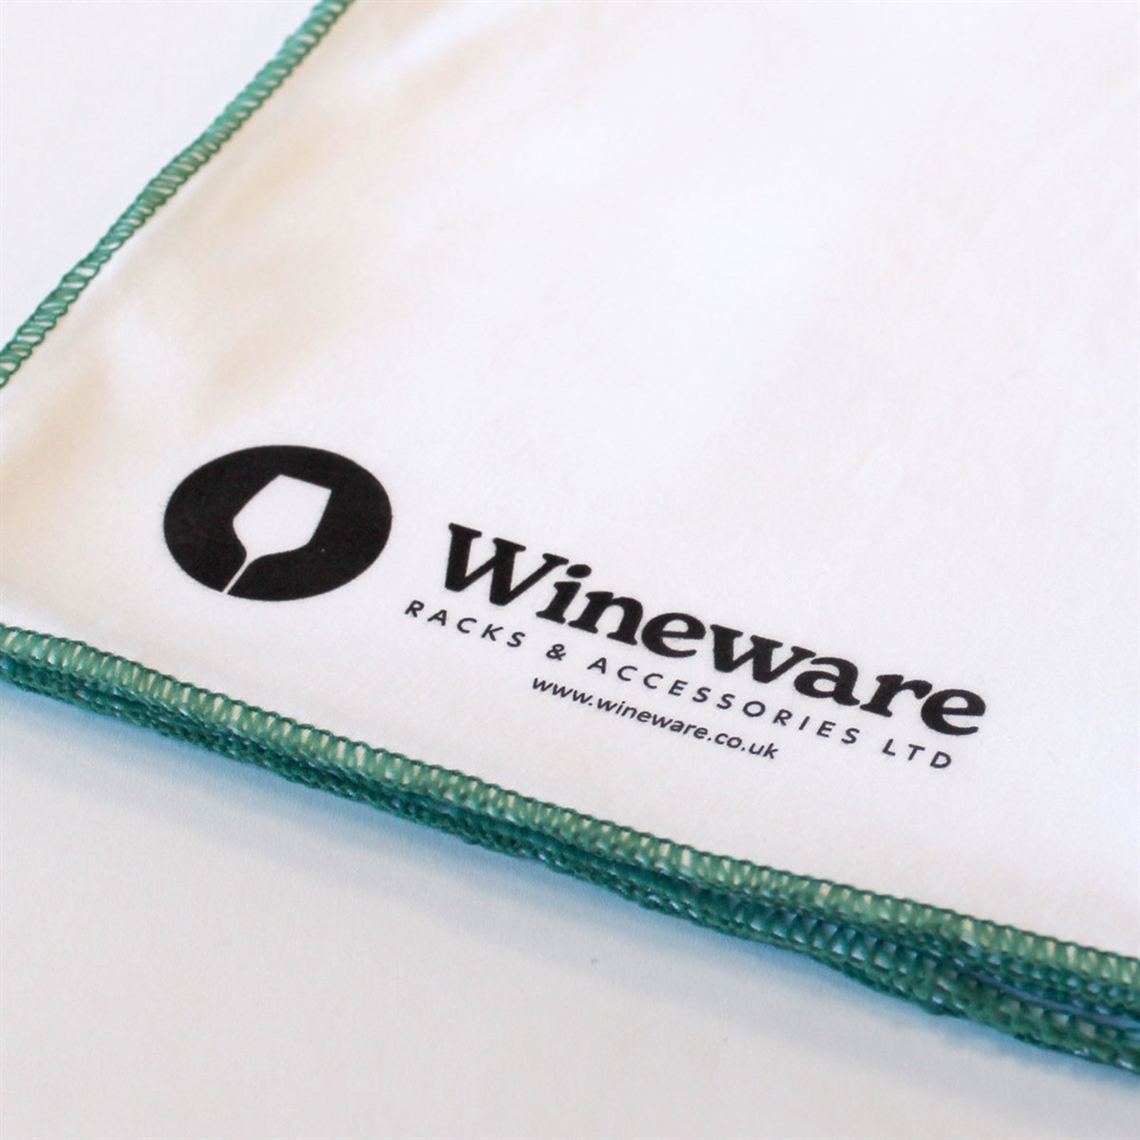 View more exquisit from our Wine Glass Cleaning & Accessories range